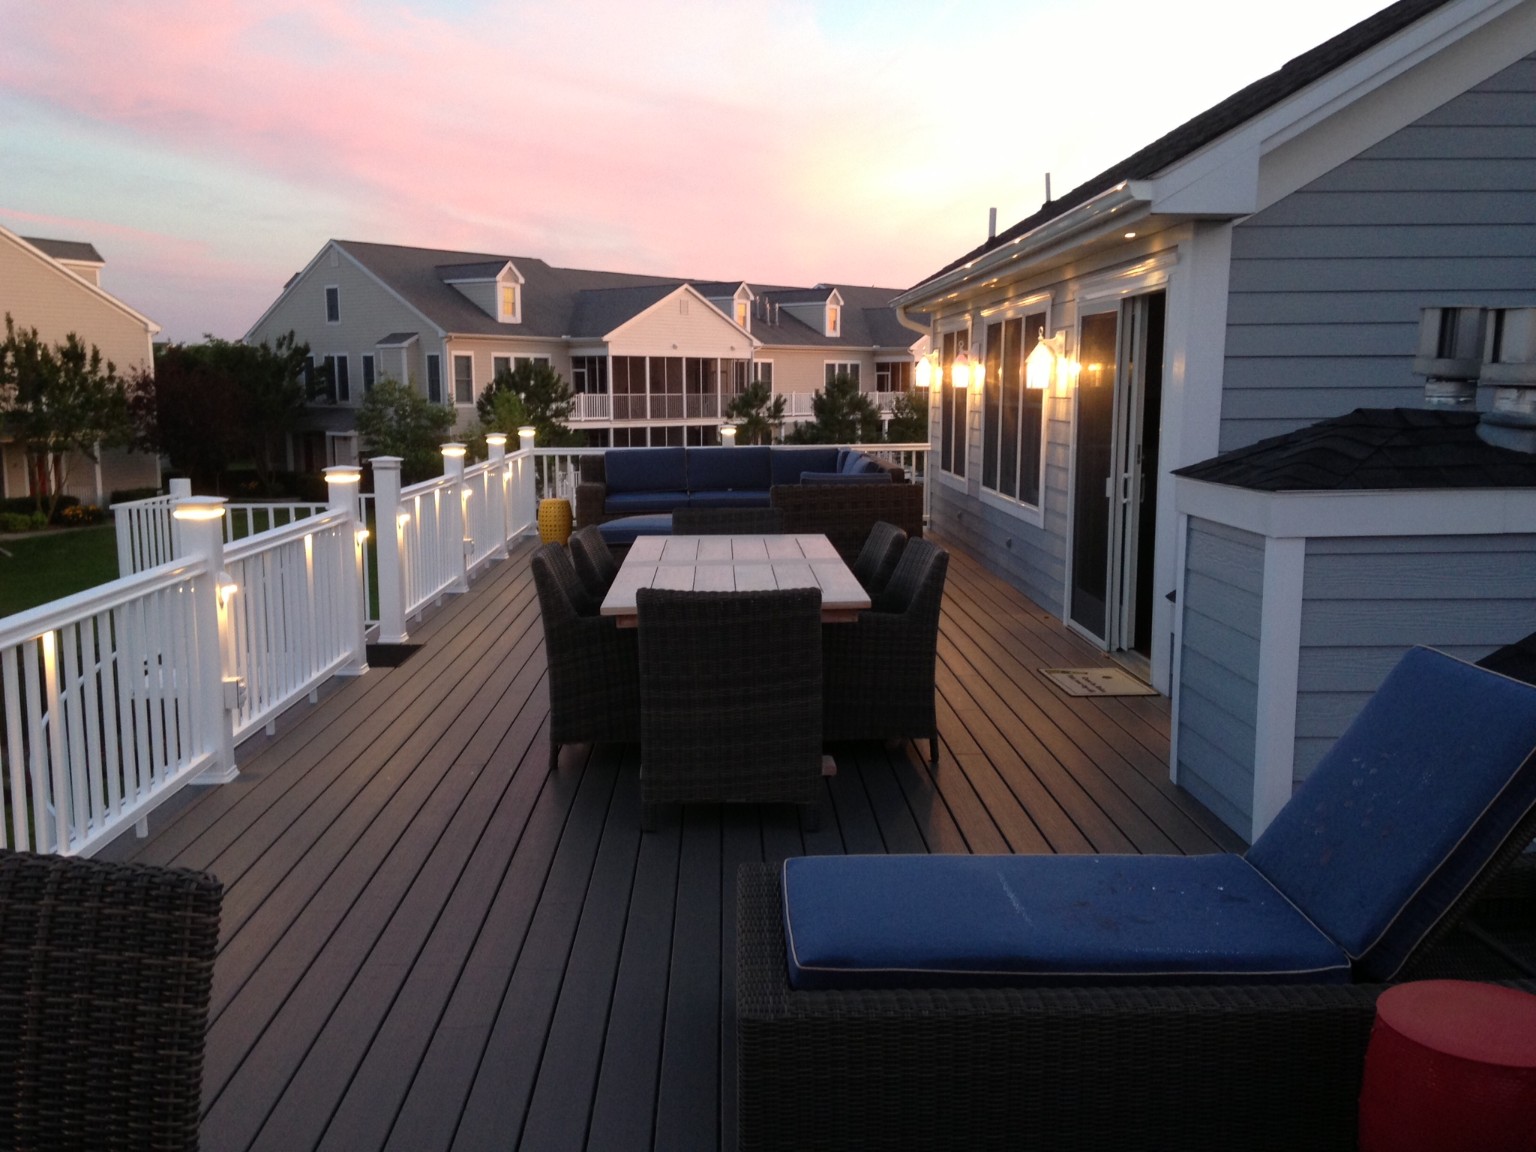 Willow Oak Deck Addition in Bear Trap Dunes, Ocean View DE with PVC Extruded Decking and Patio Furniture